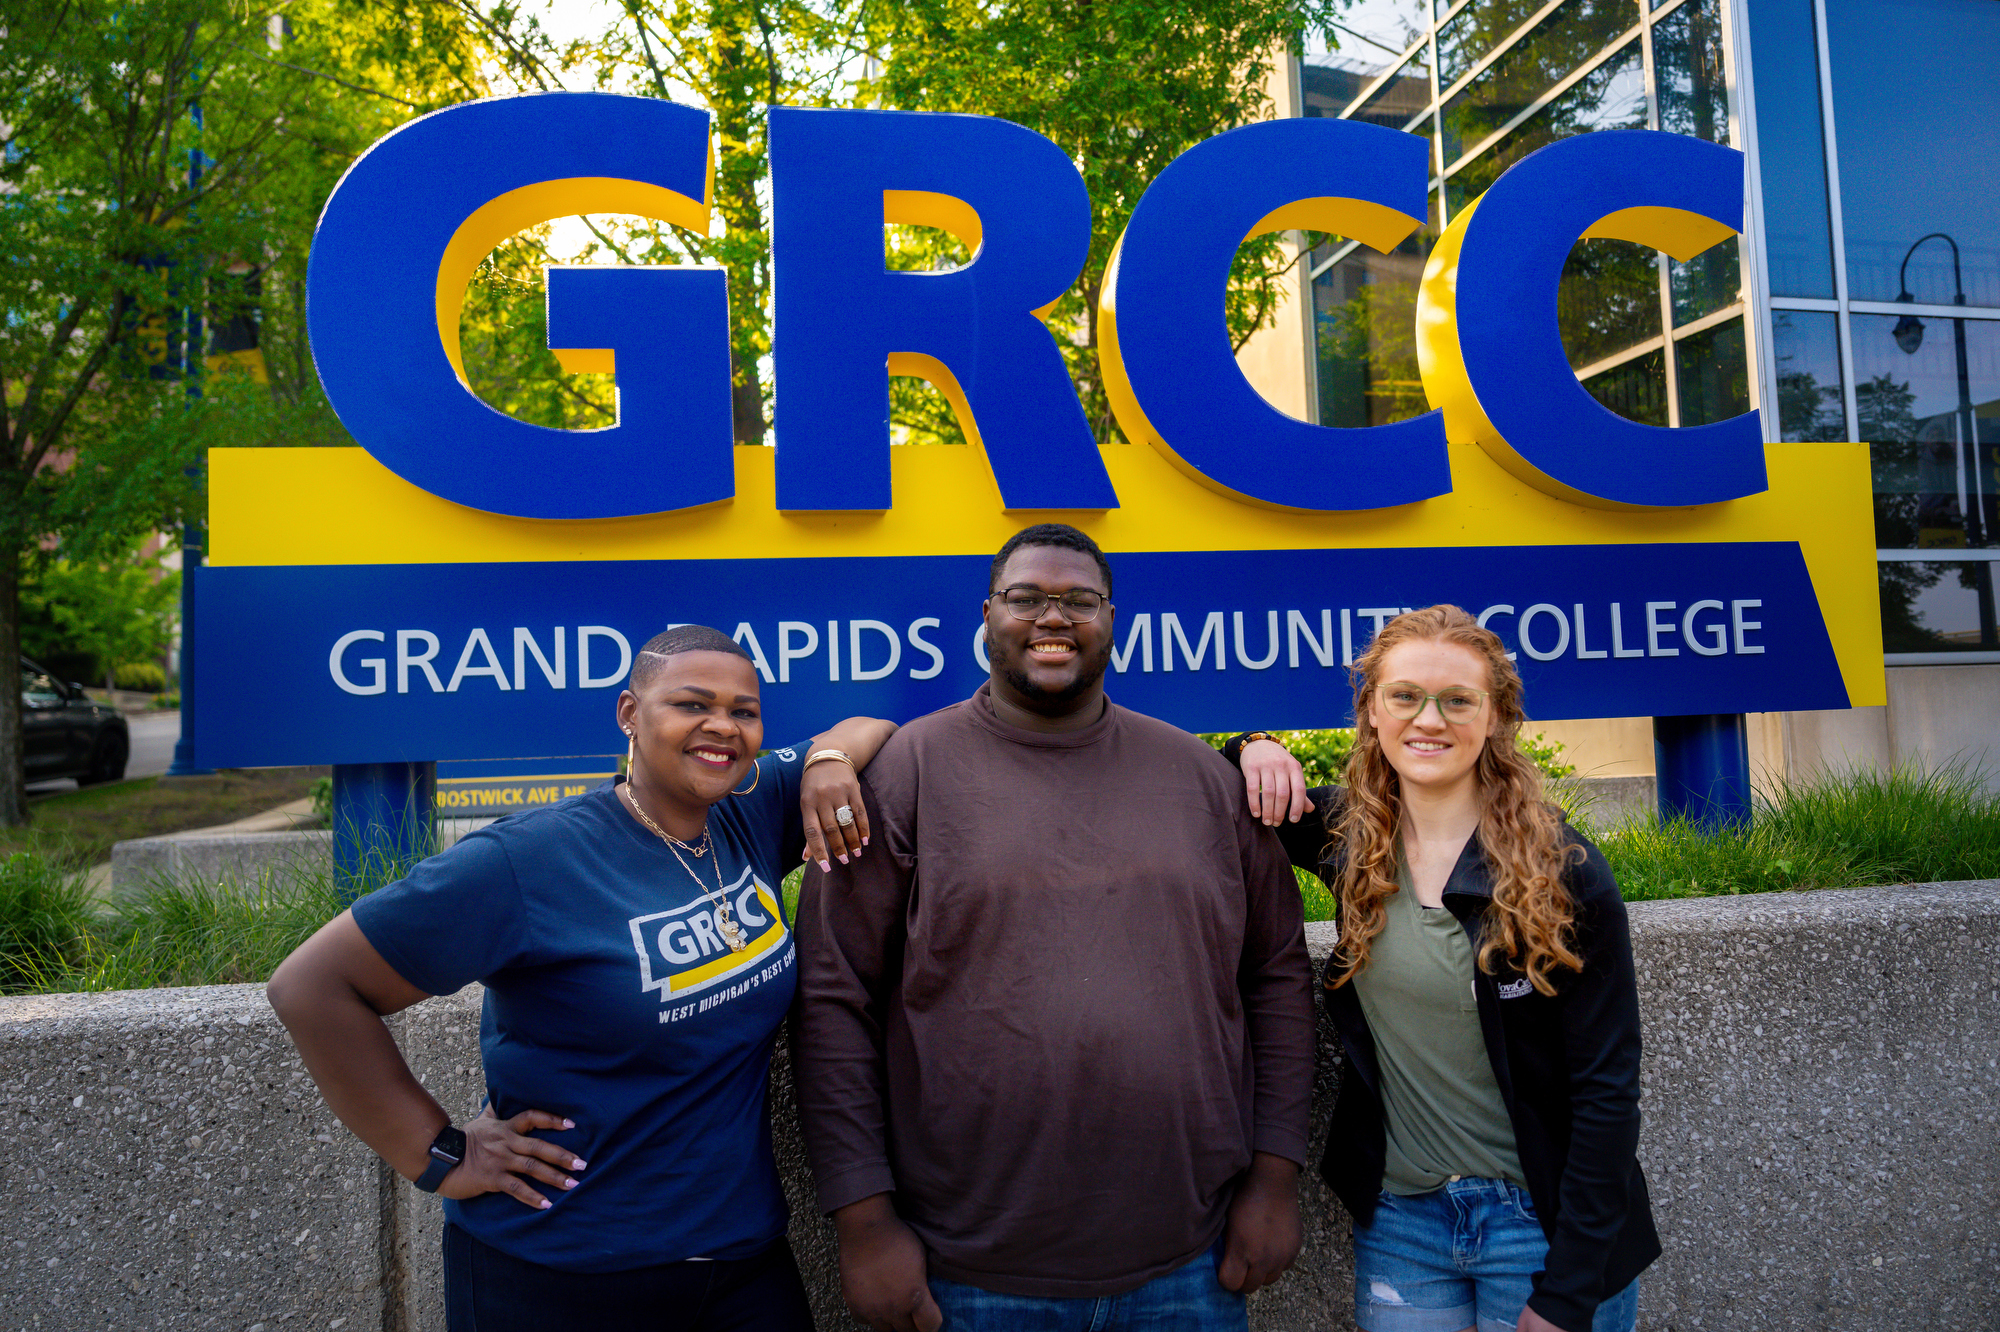 Three GRCC Students in front of GRCC Sign by Science Building